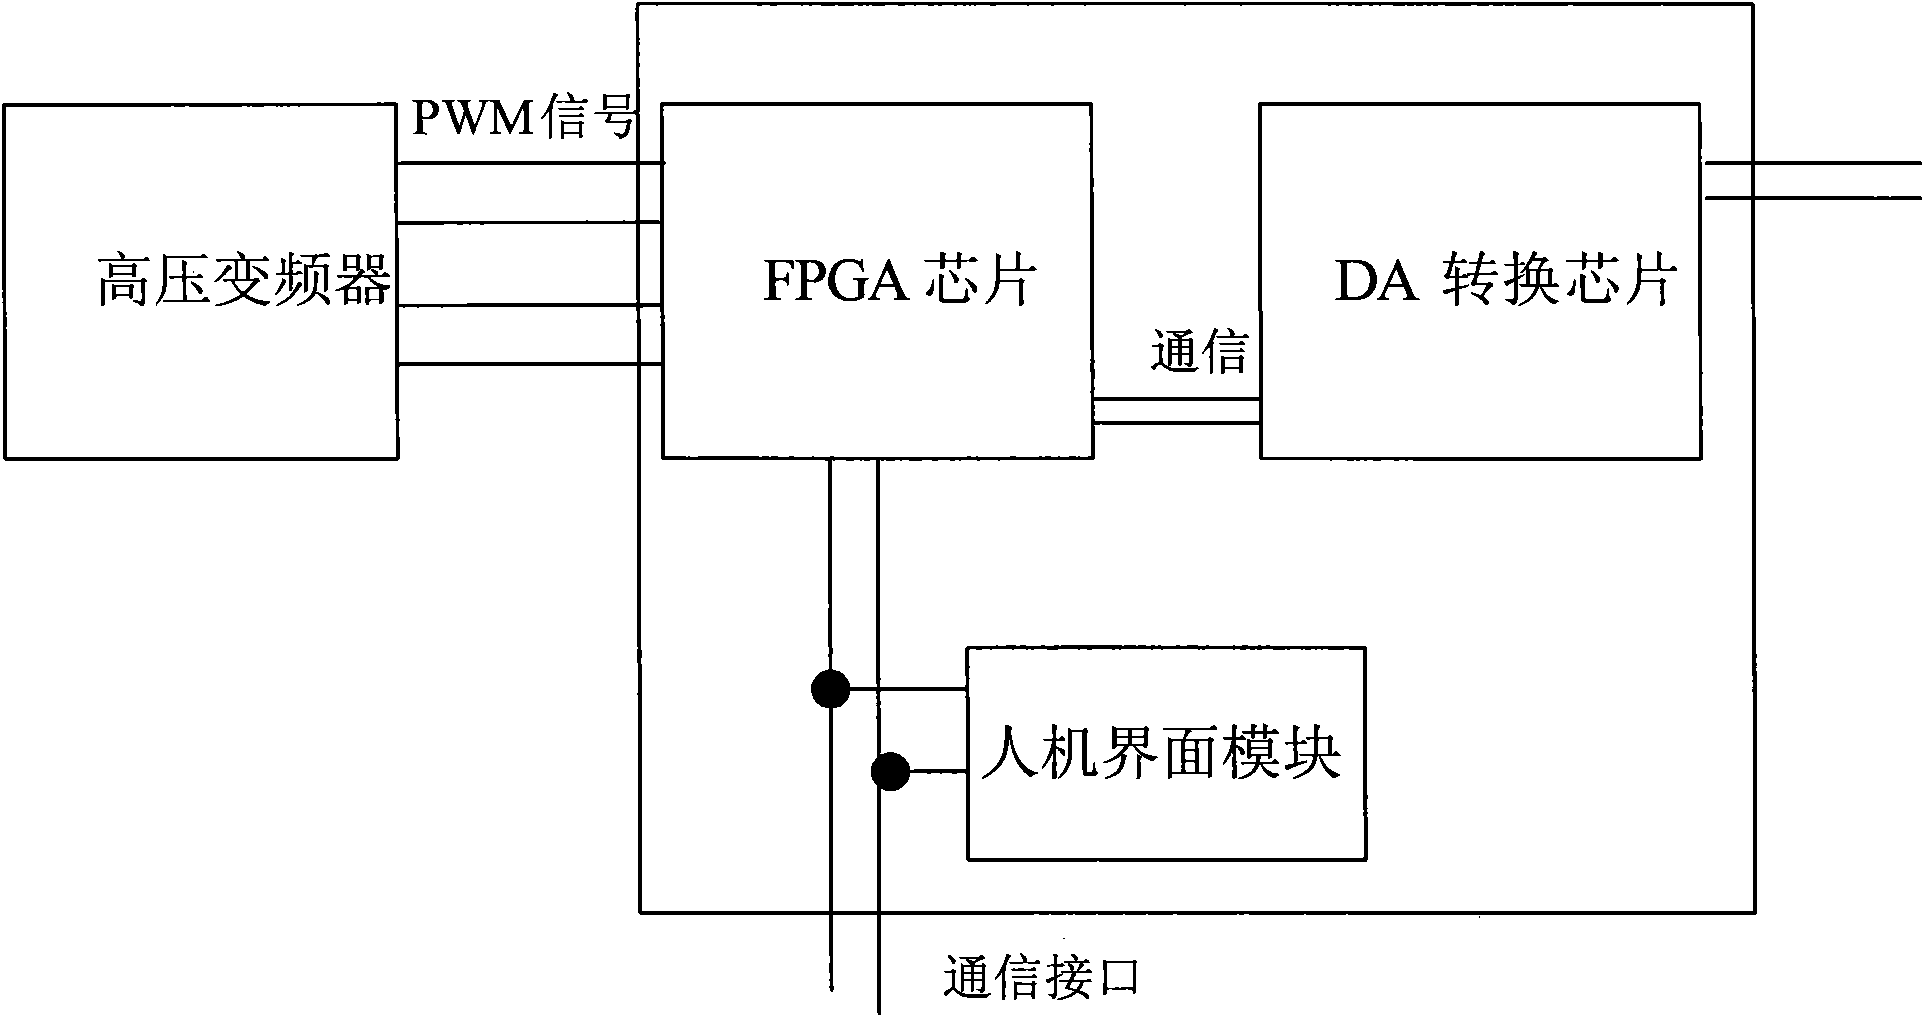 Test system of high voltage frequency converter